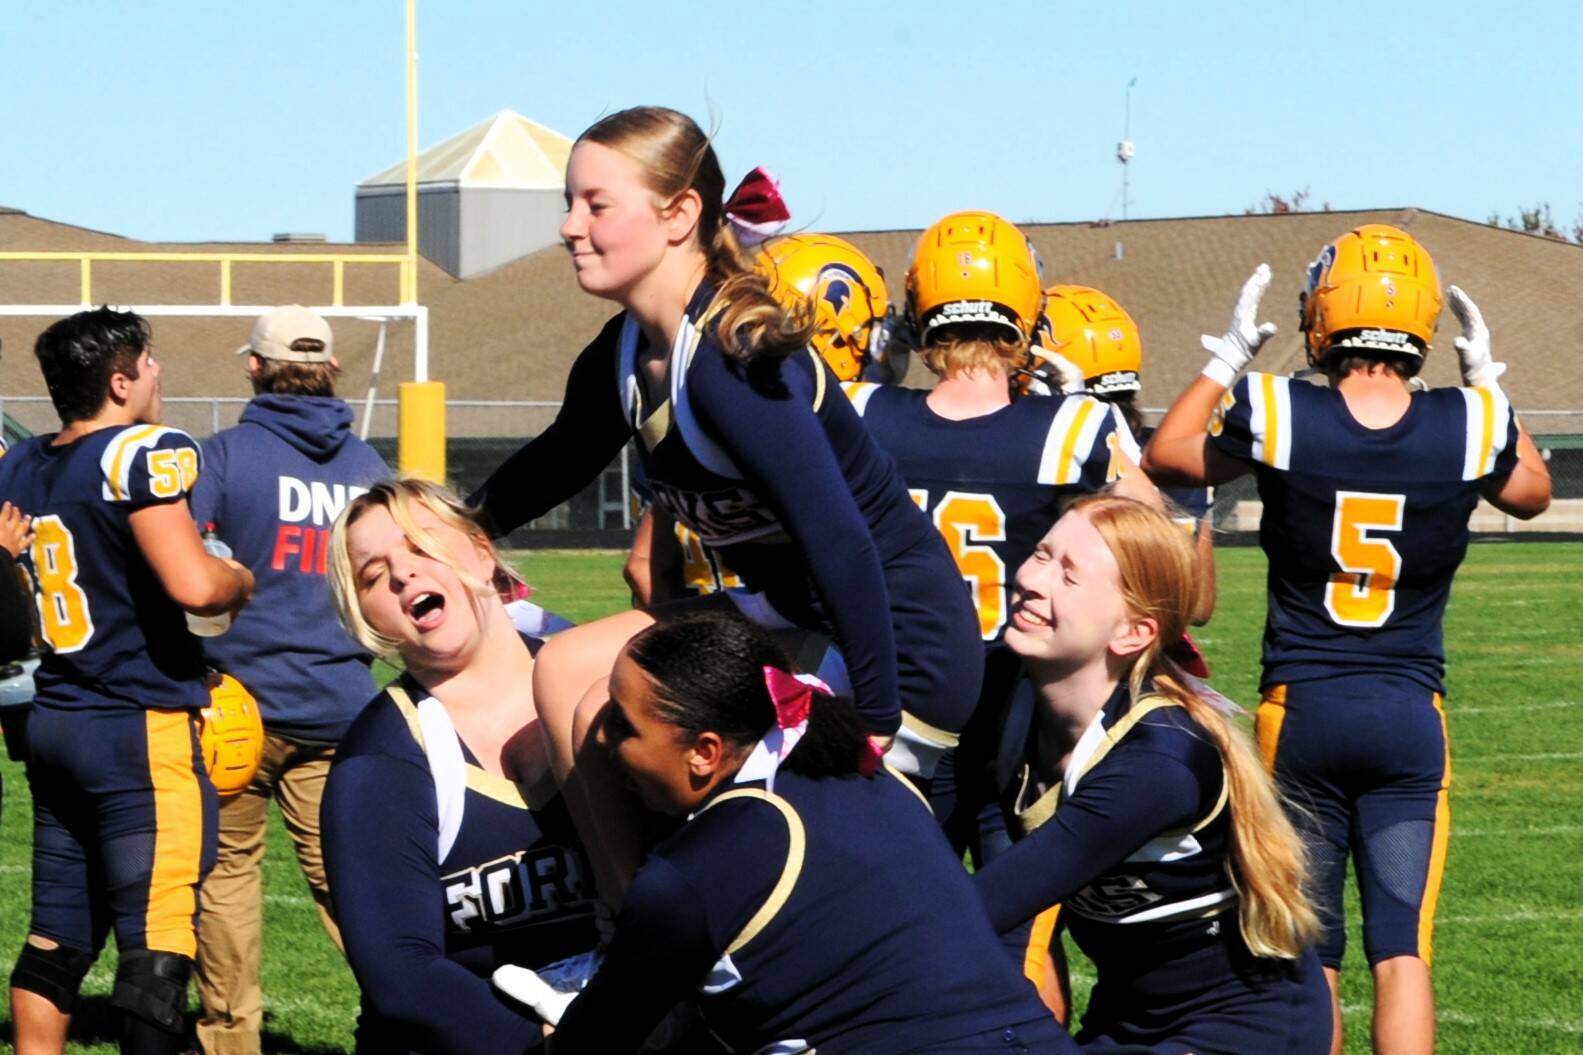 It takes some strong-willed cheerleaders as is pictured here Saturday in Sequim where a portion of the Forks squad showed determination as they went through their routines. Photo by Lonnie Archibald